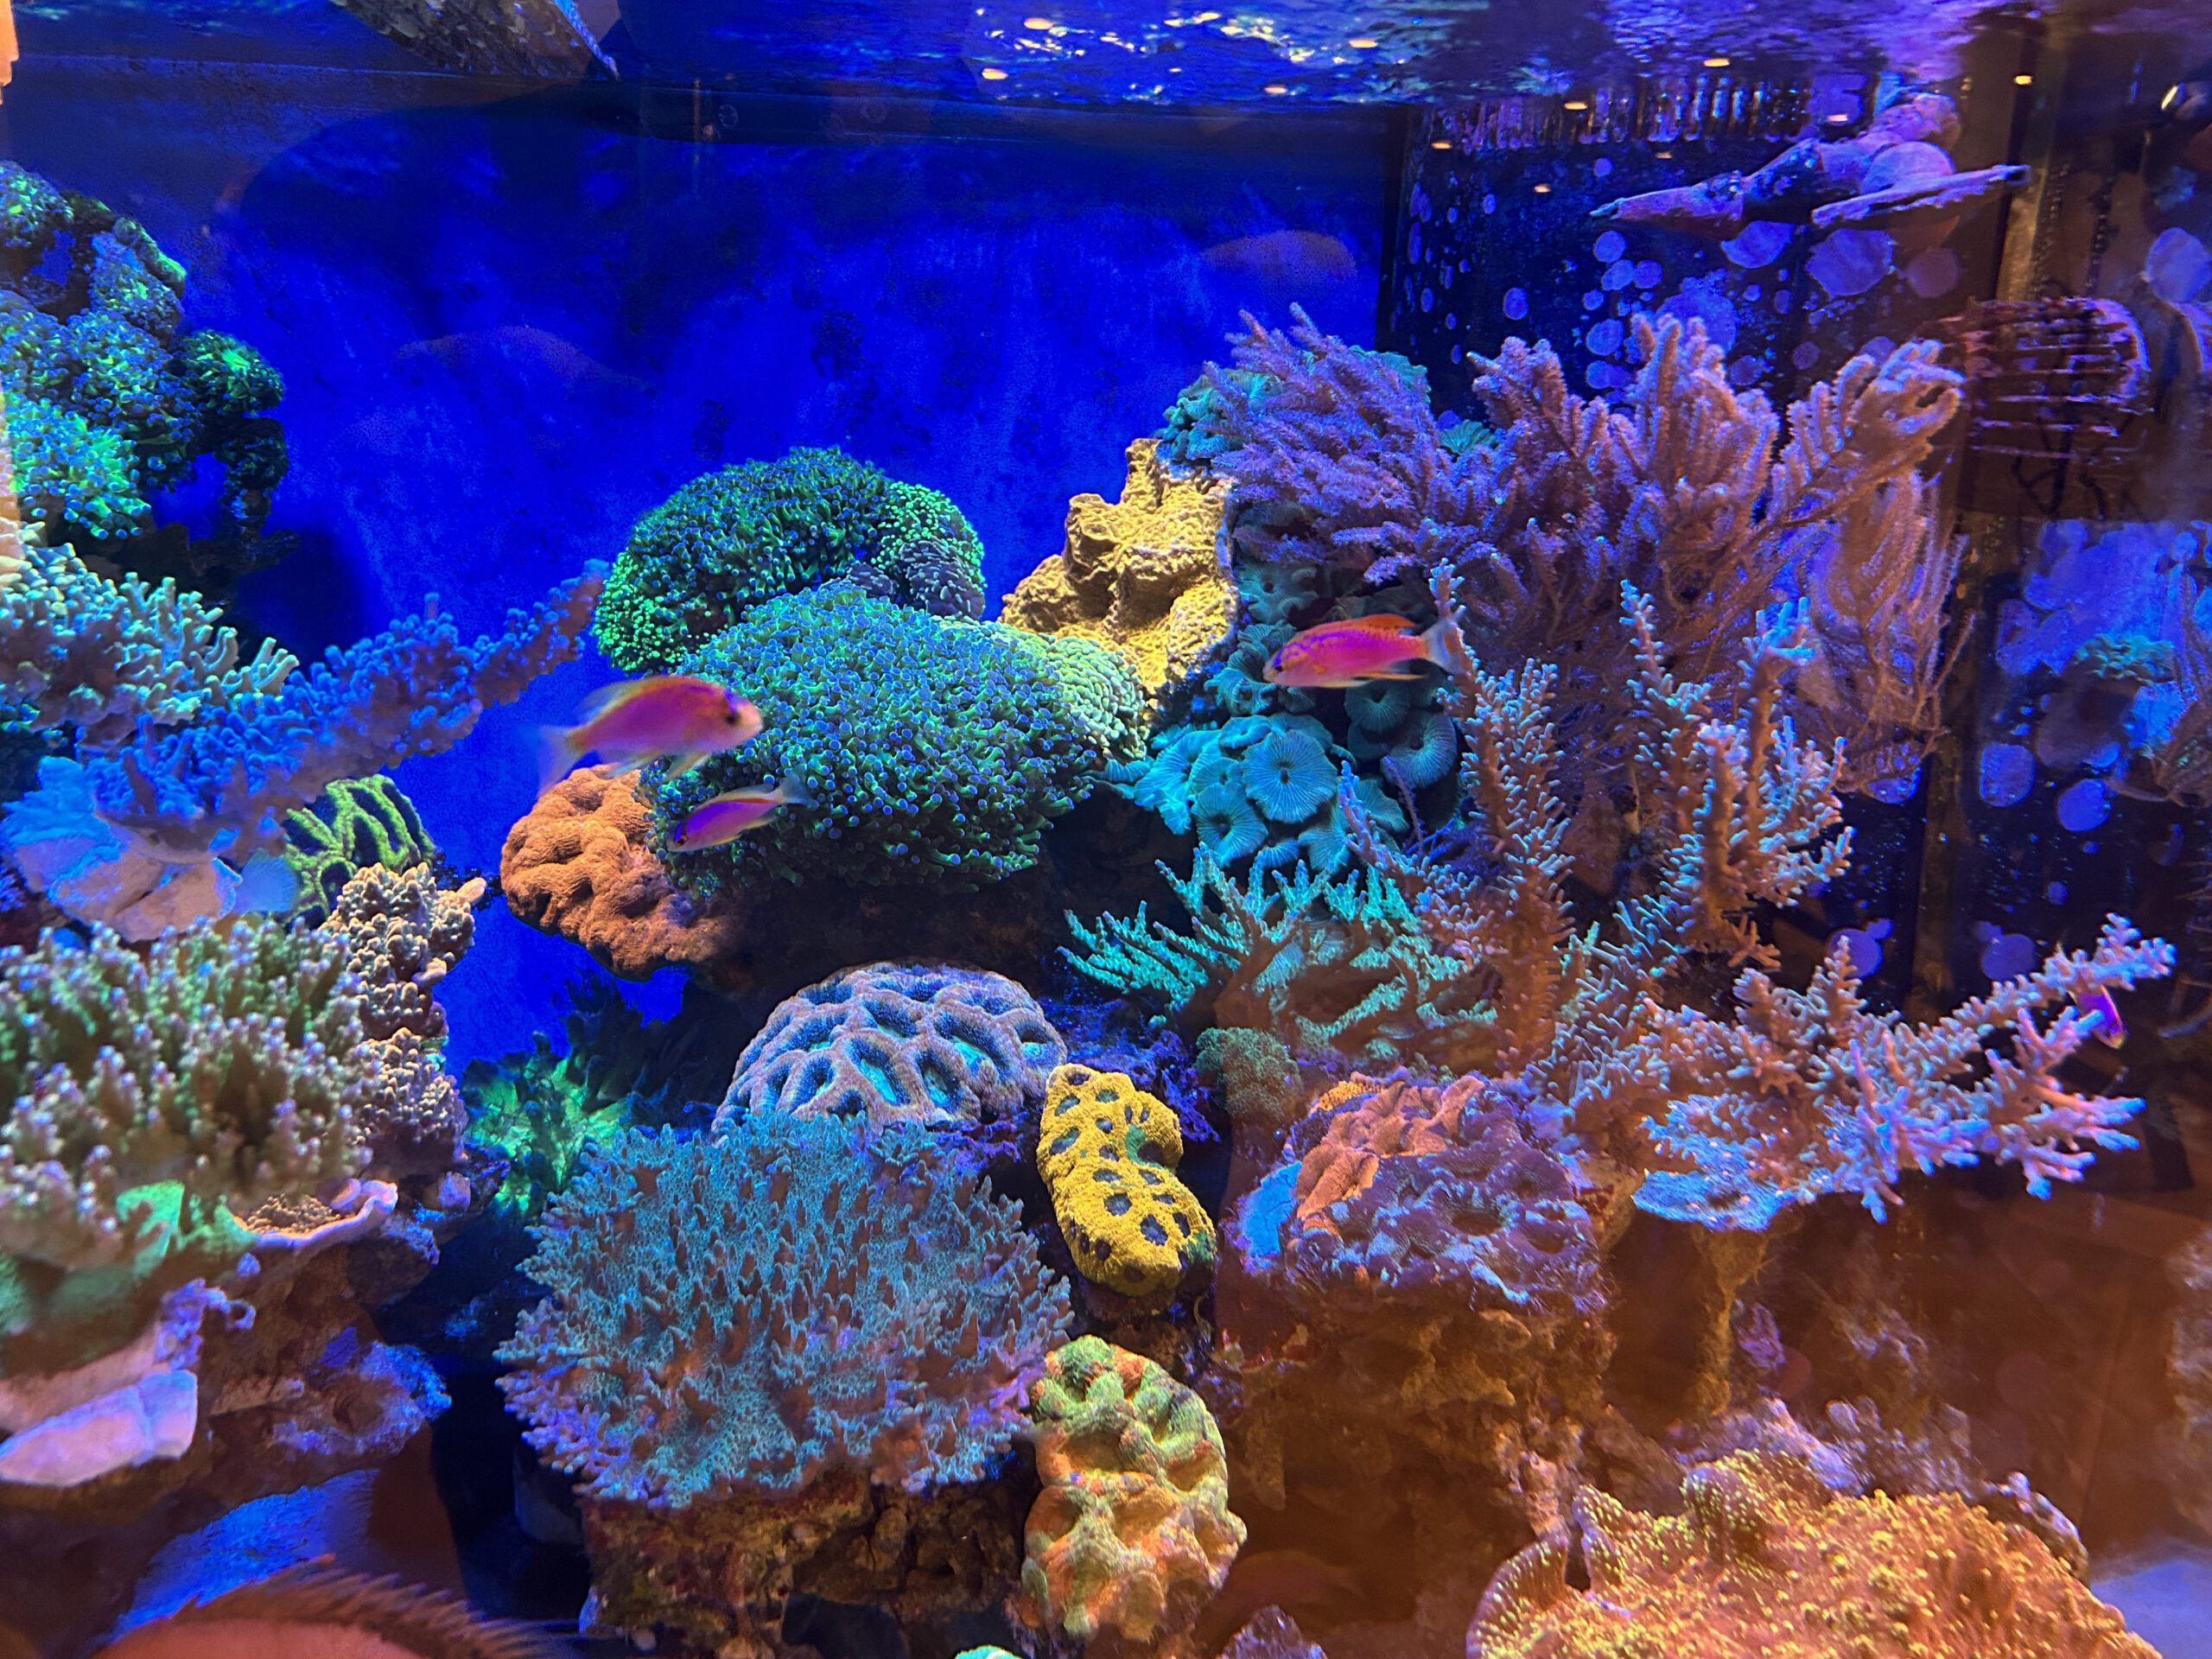 Purigen Seachem.- Living Reef - Coral Reef Aquarium products and Services  Christchurch, New Zealand